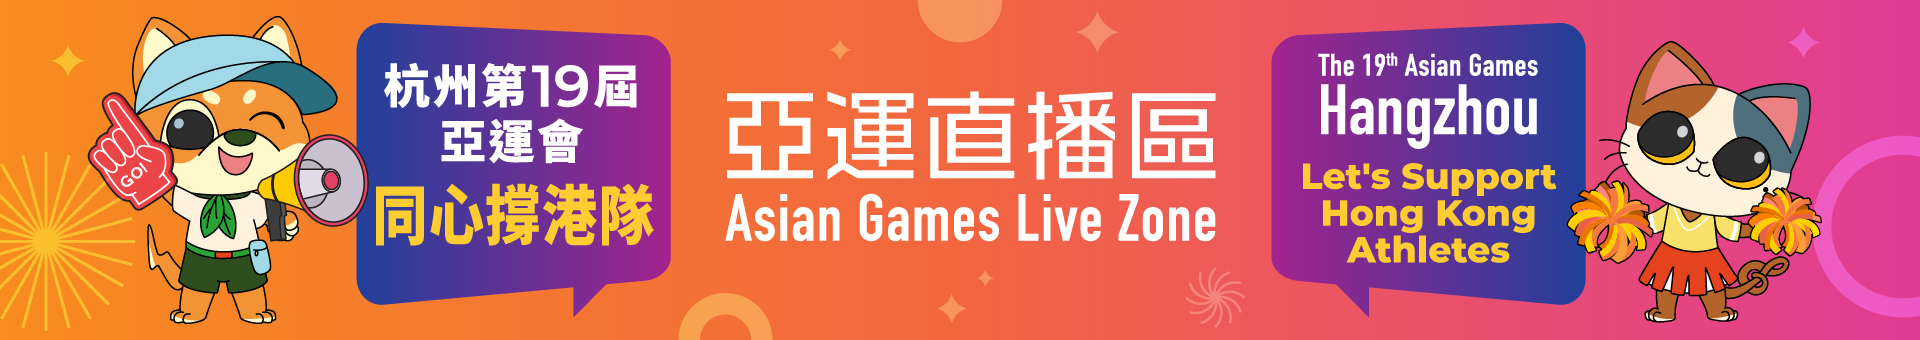 Asian Games Live Zone